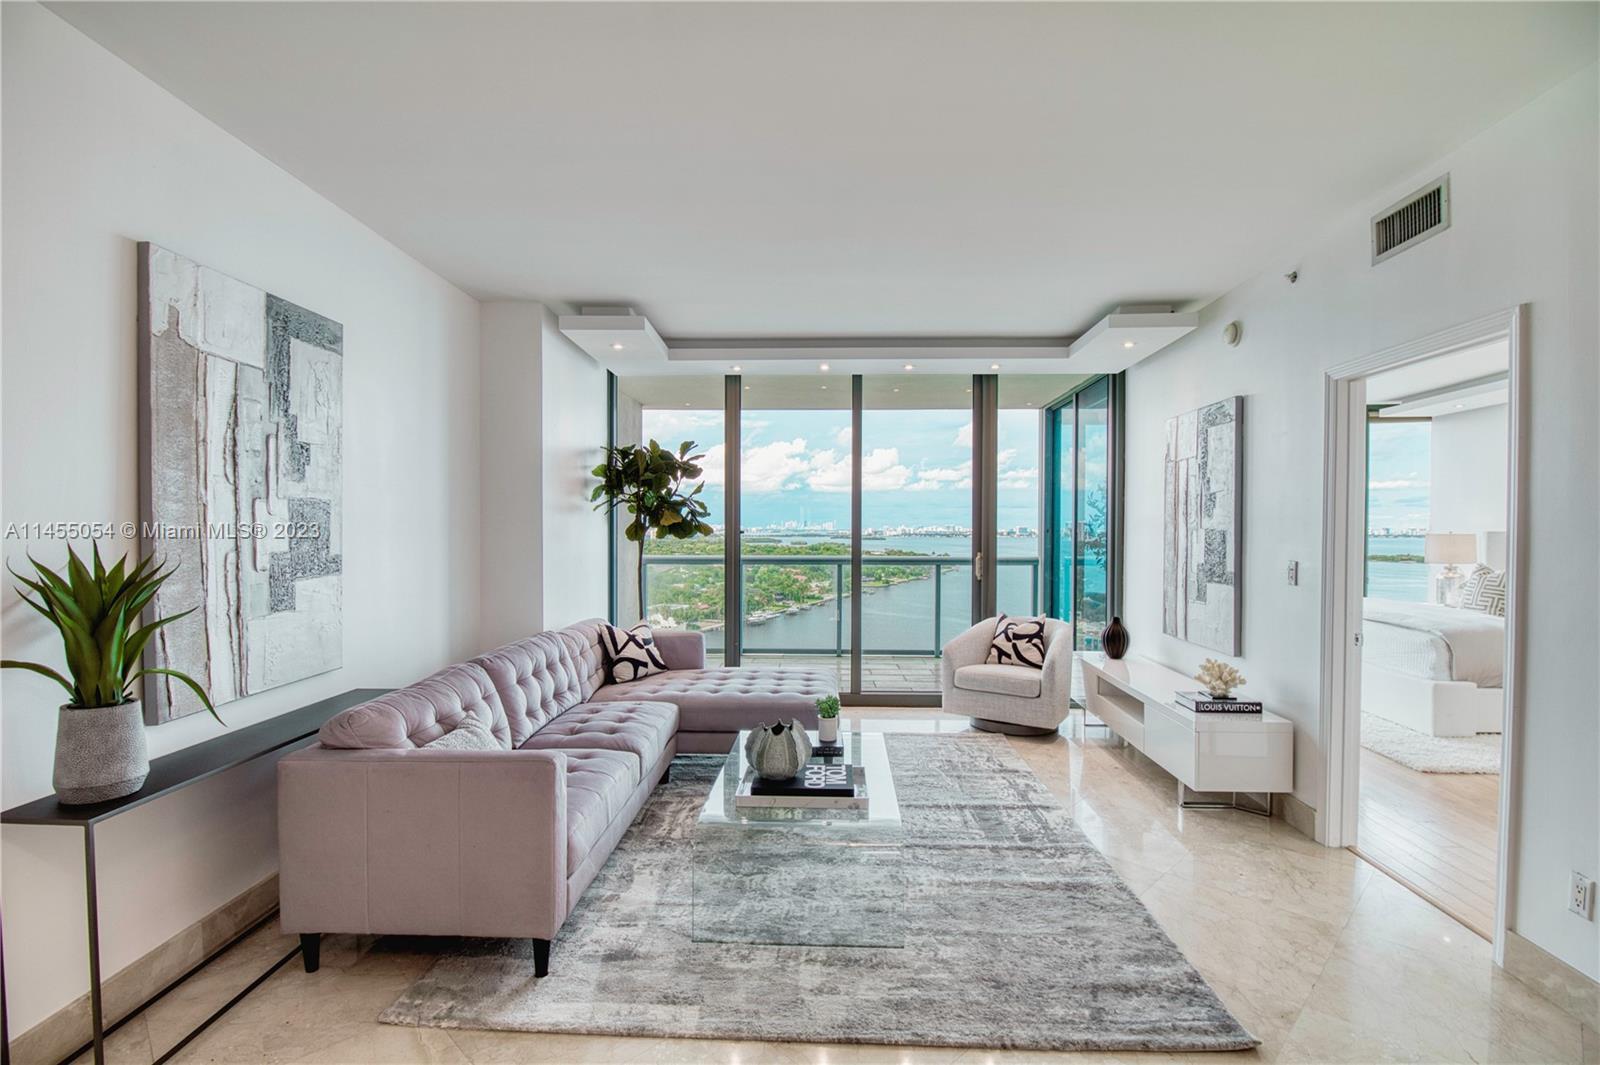 Live Limitlessly in this delightful 18th floor unit at Blue Condo overlooking Biscayne Bay & City vi